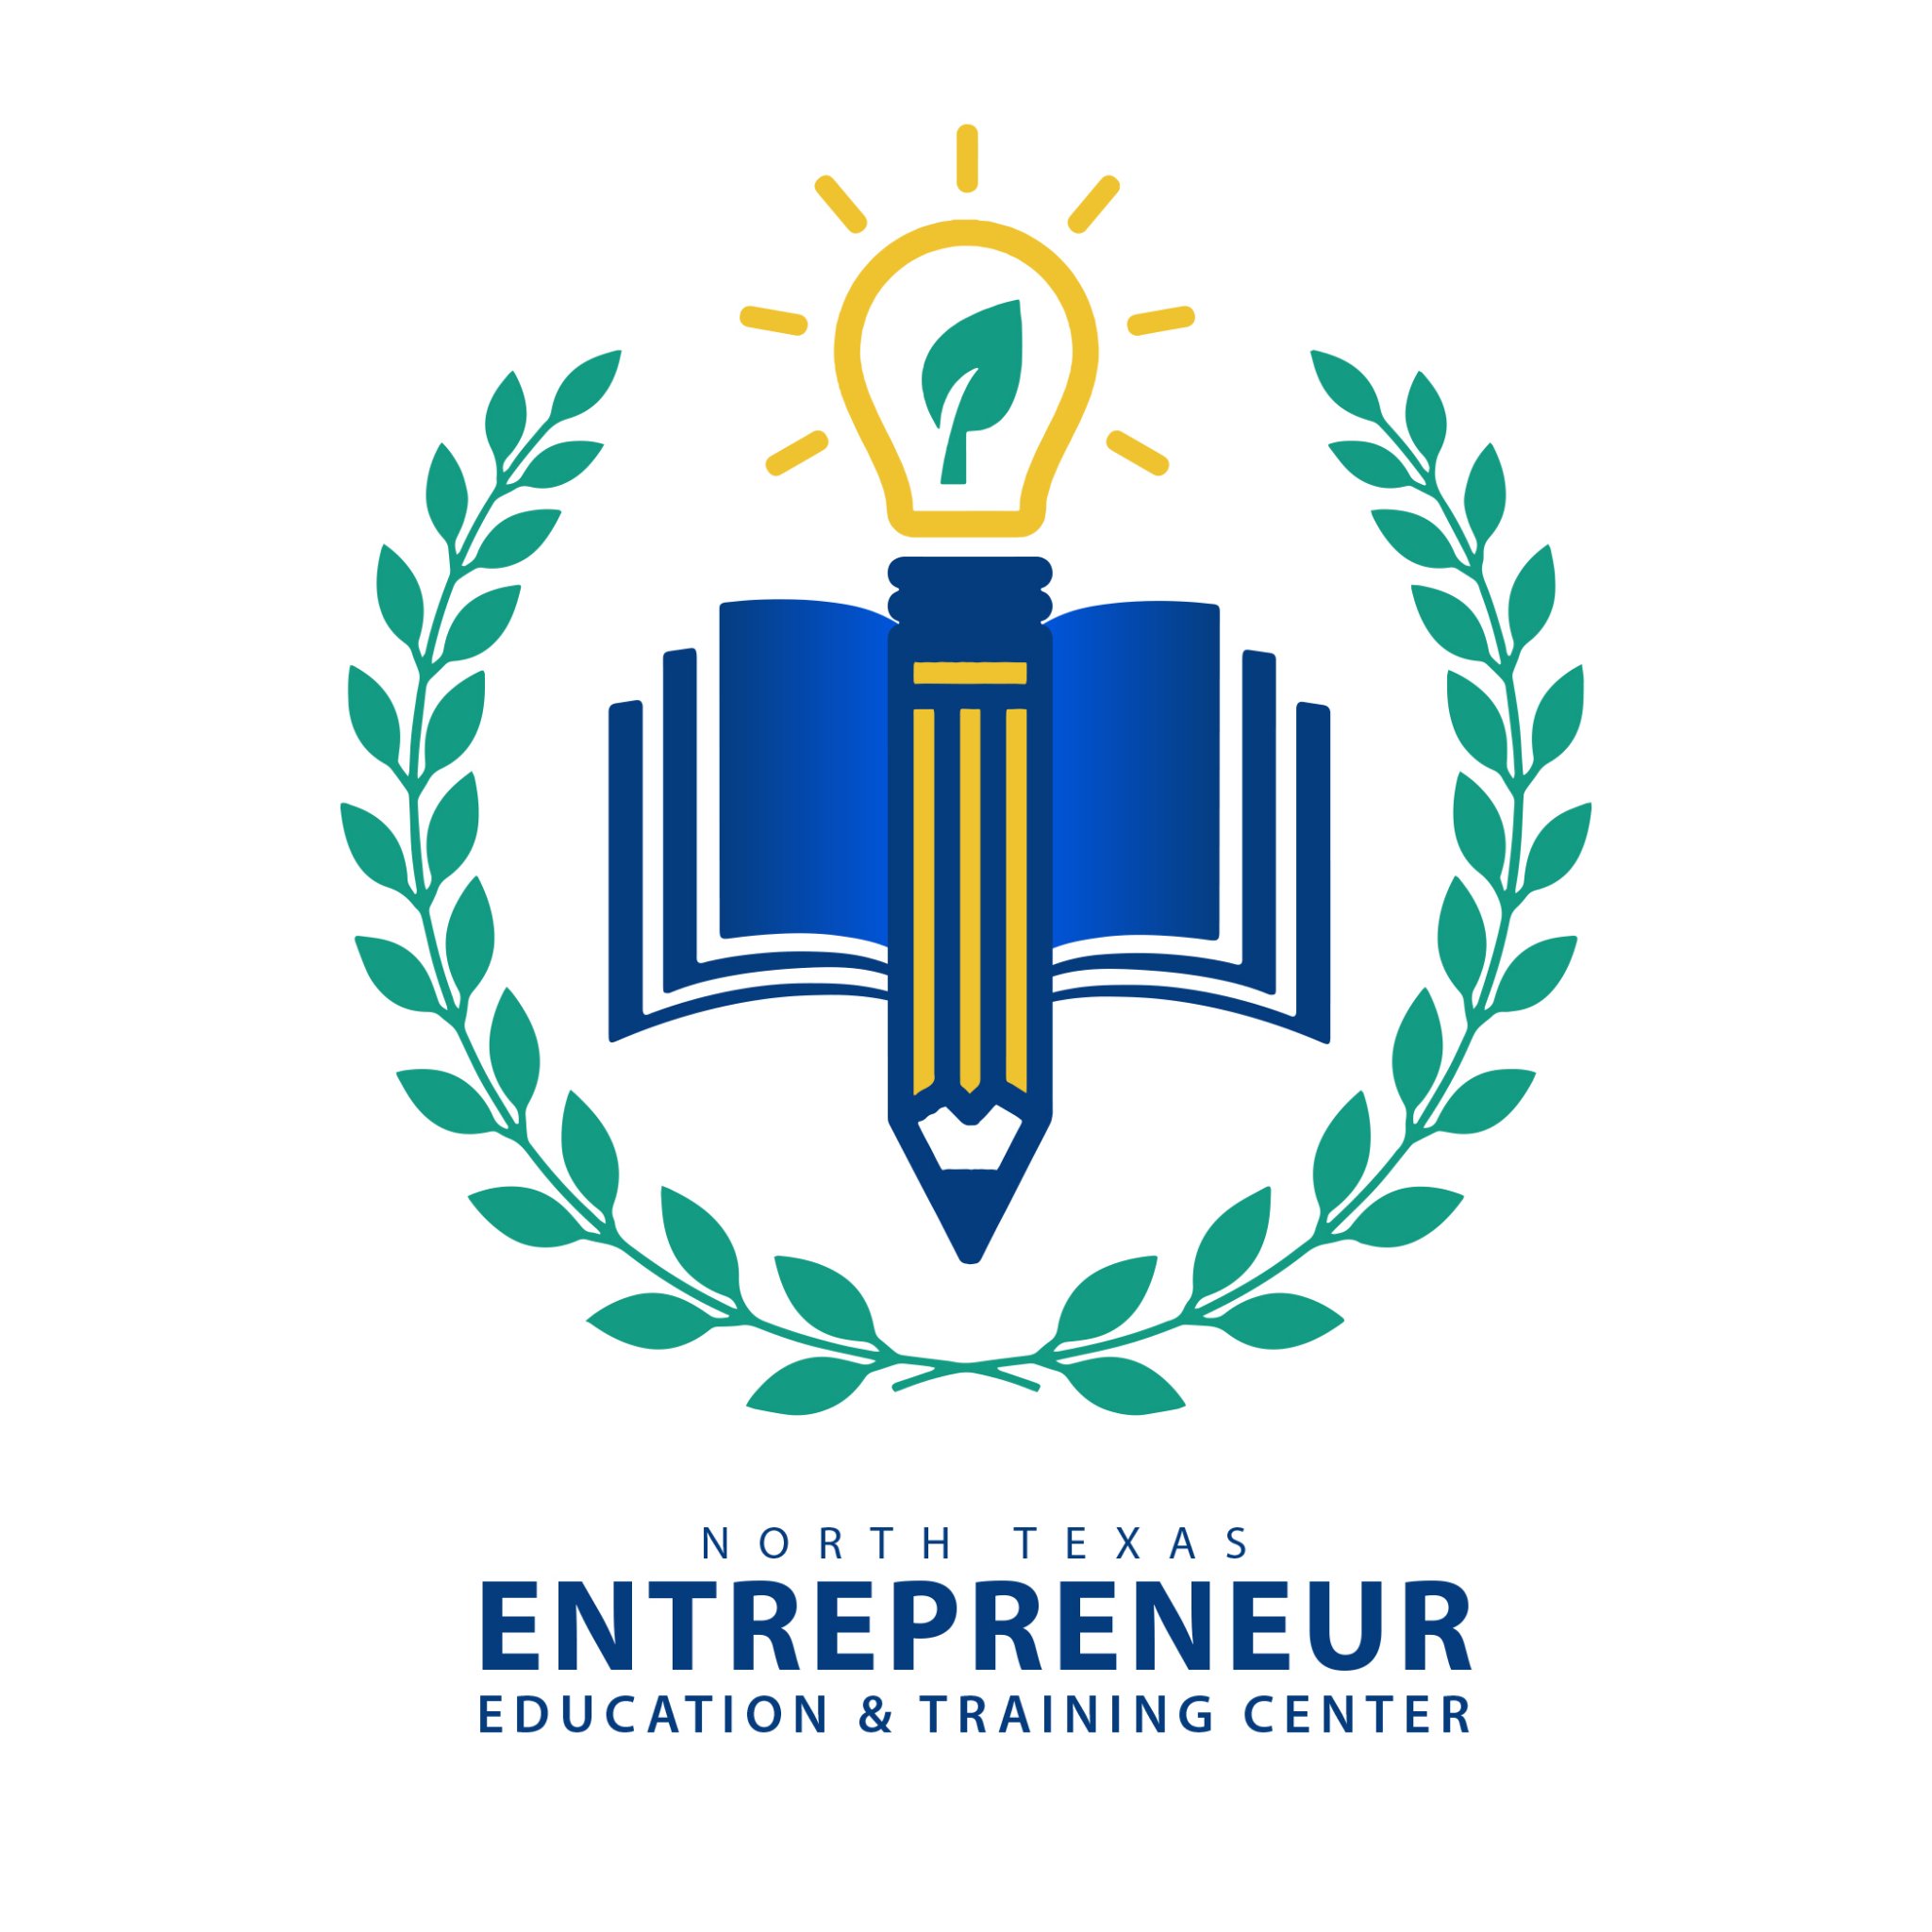 An education and training center for aspiring Entrepreneurs to start their business with a solid foundation.